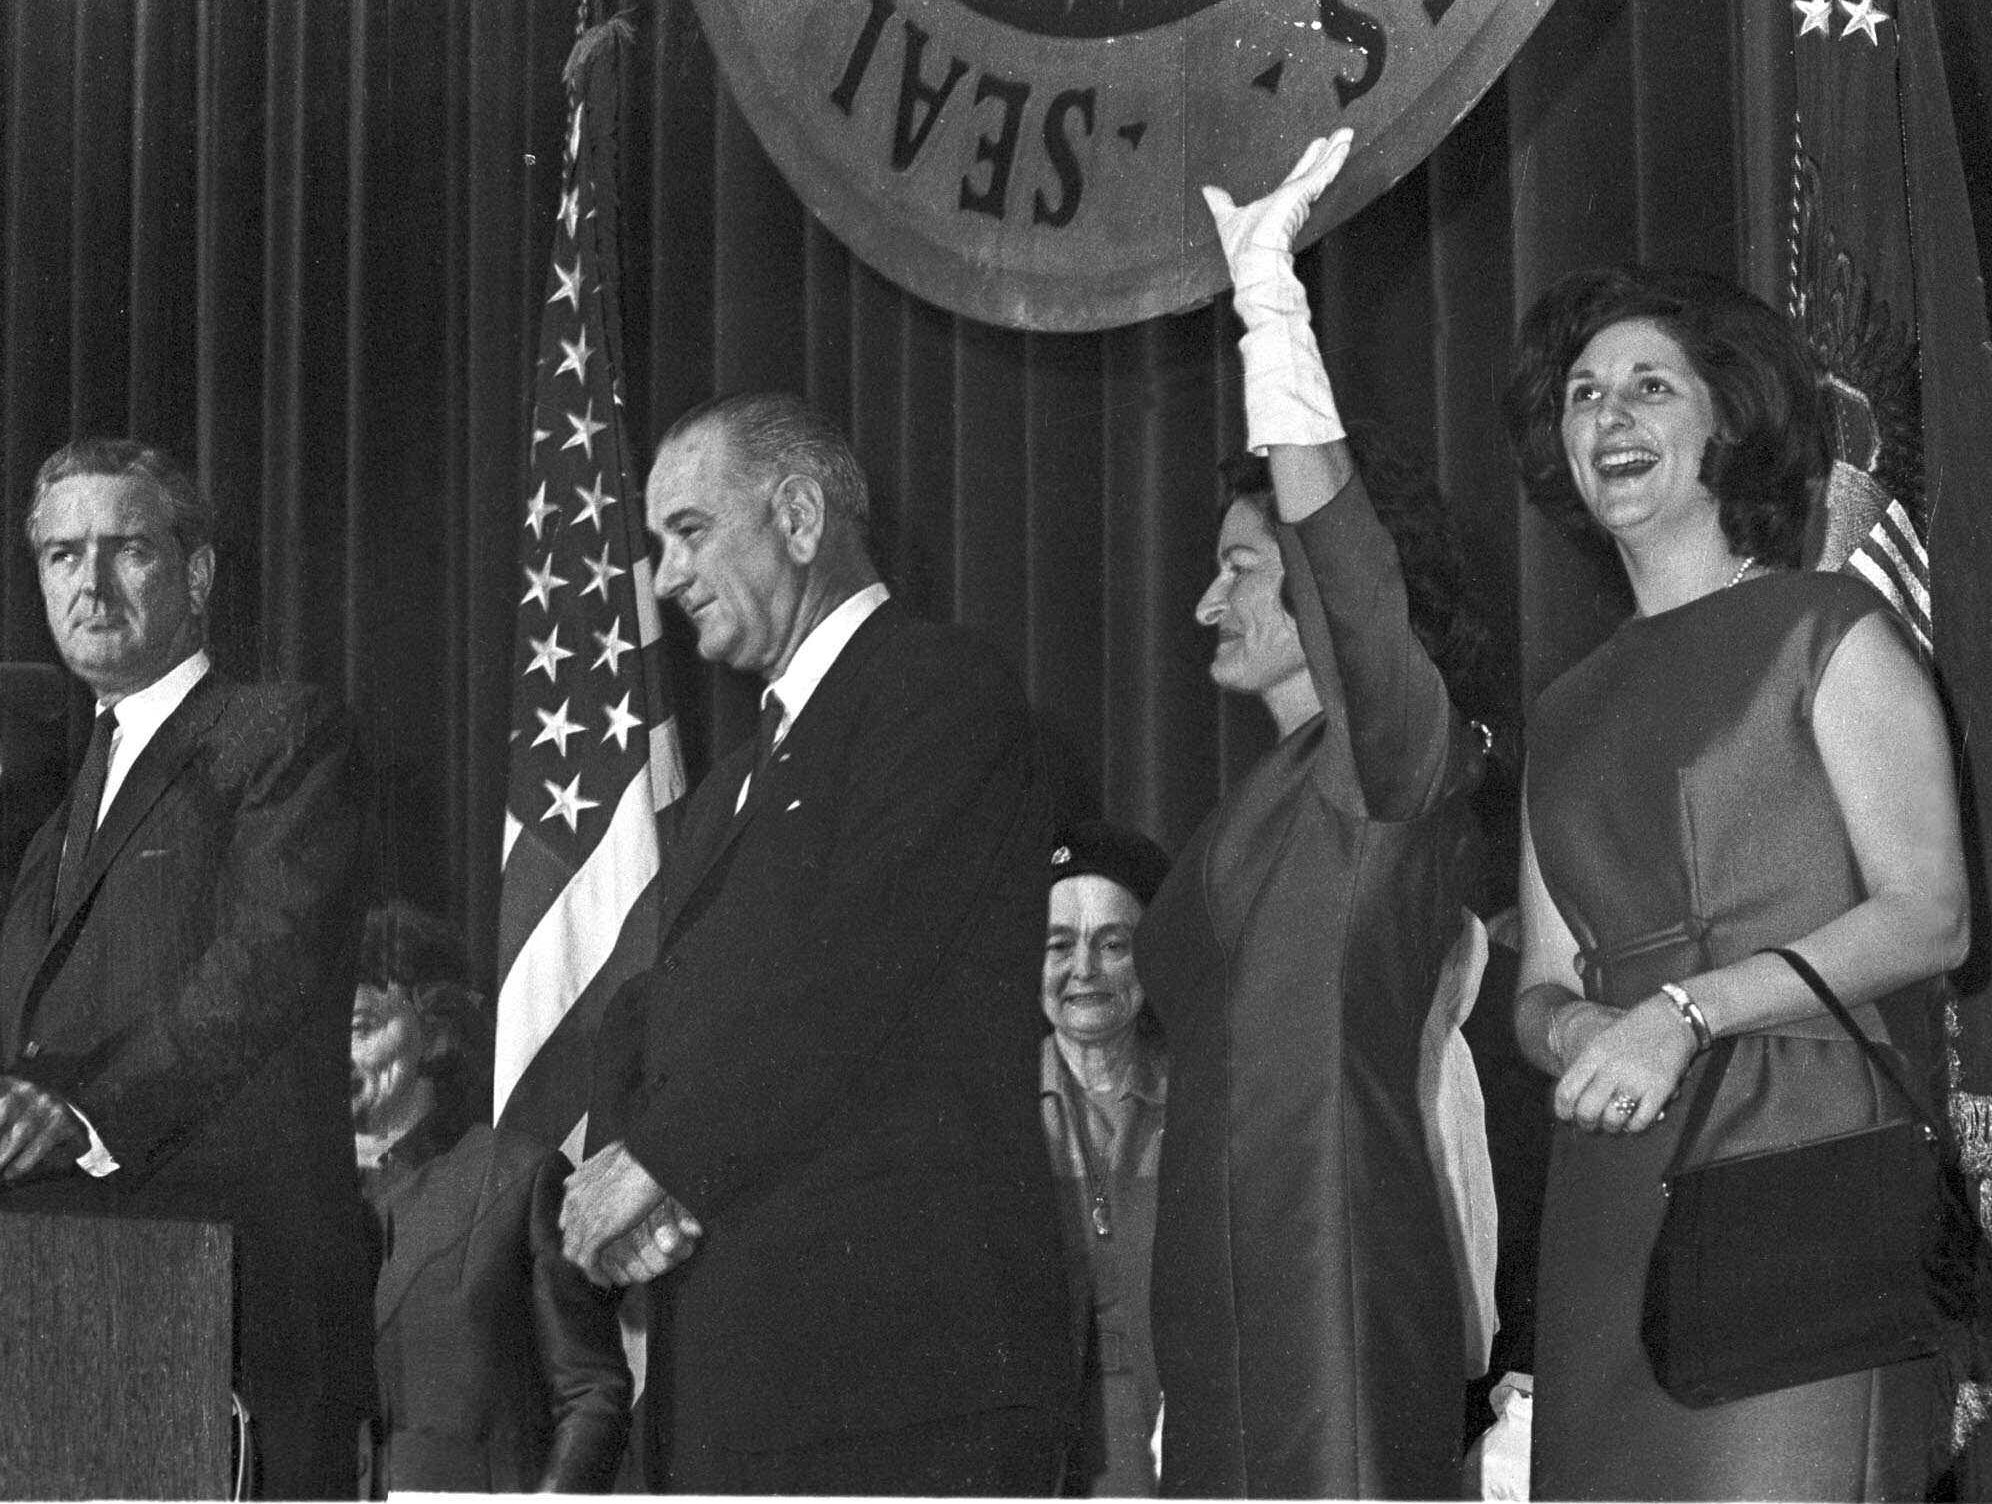 ** FILE ** In this Nov. 4, 1964, file photo, President Lyndon B. Johnson stands with hands folded Nov. 4, 1964 as his wife, Lady Bird Johnson and daughter Lynda Bird, right, acknowledge cheers of crowds that jammed Austin Memorial Auditorium to honor the President on his victory.  Johnson, who carried the nickname "Landslide Lyndon" for his razor-thin 87-vote victory in a Texas Senate race, won over Barry Goldwater in 1964, 486-52. Texas Gov. John Connally is left, at podium. (AP Photo/File)